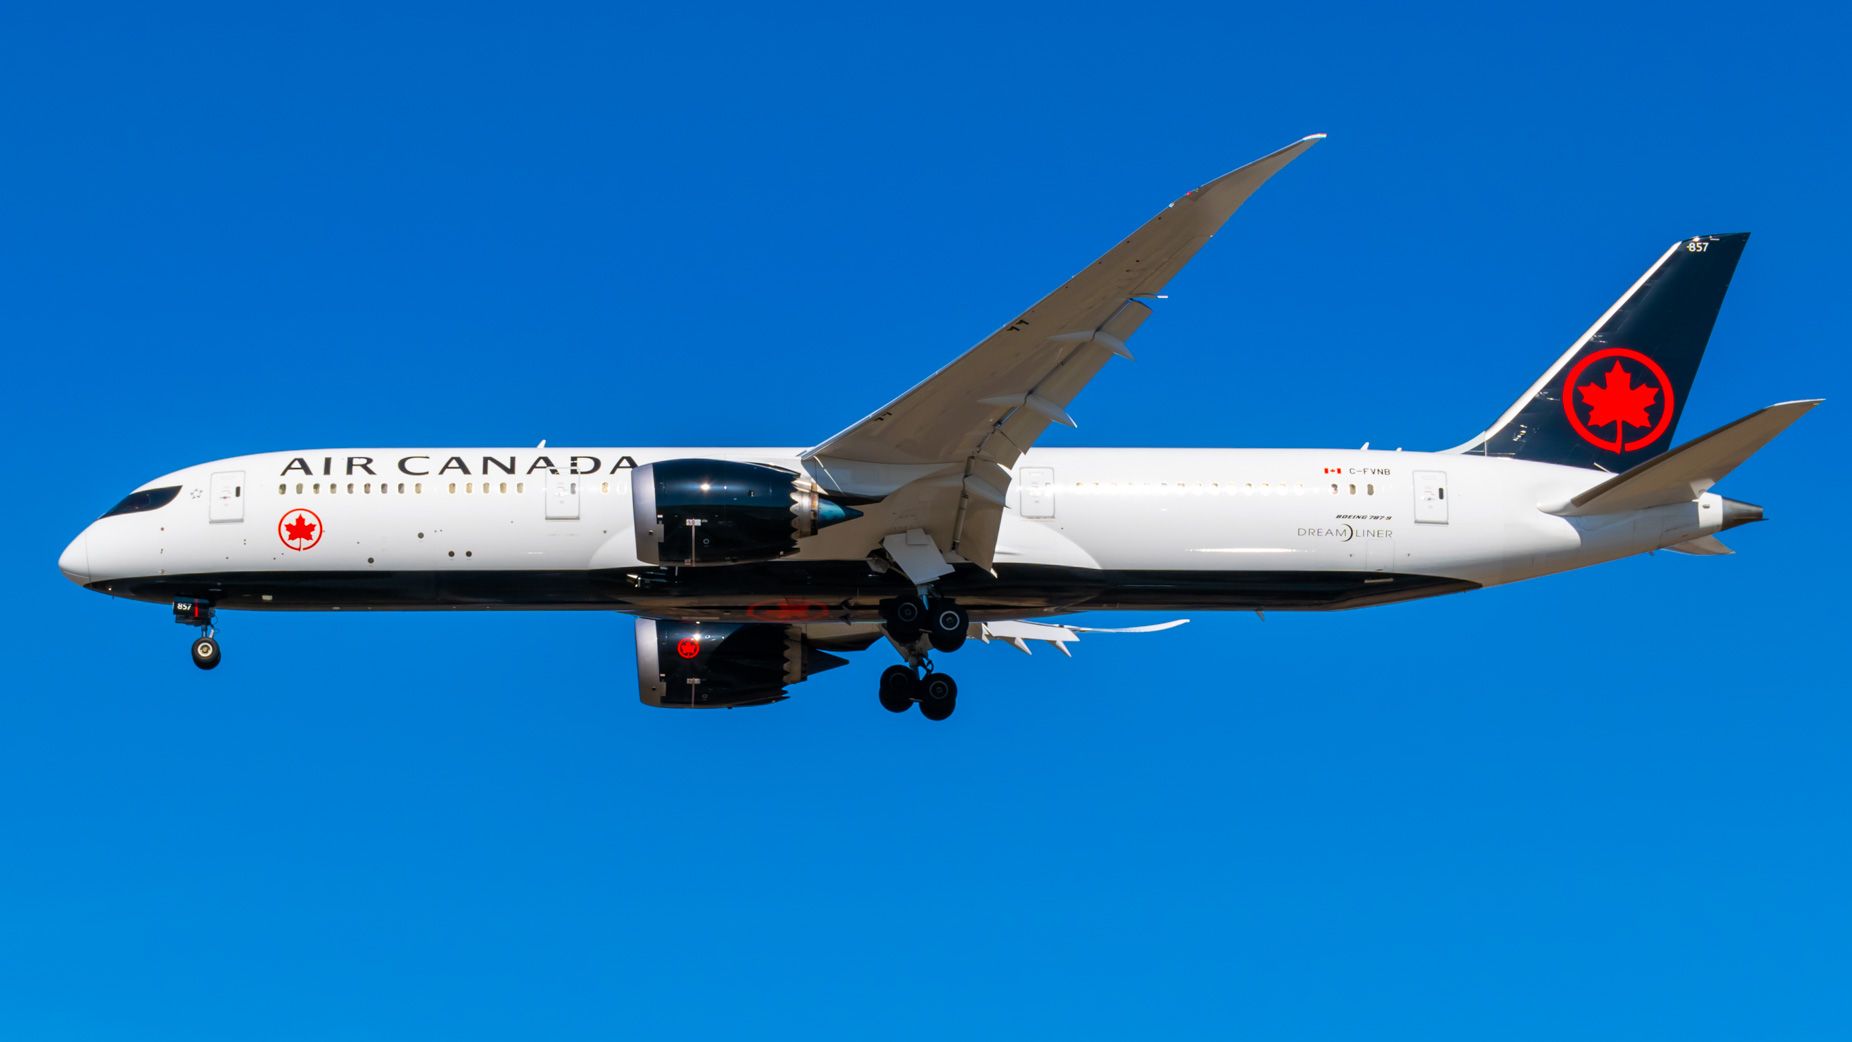 787-9 in @AirCanada's New Livery on Short Final to YVR